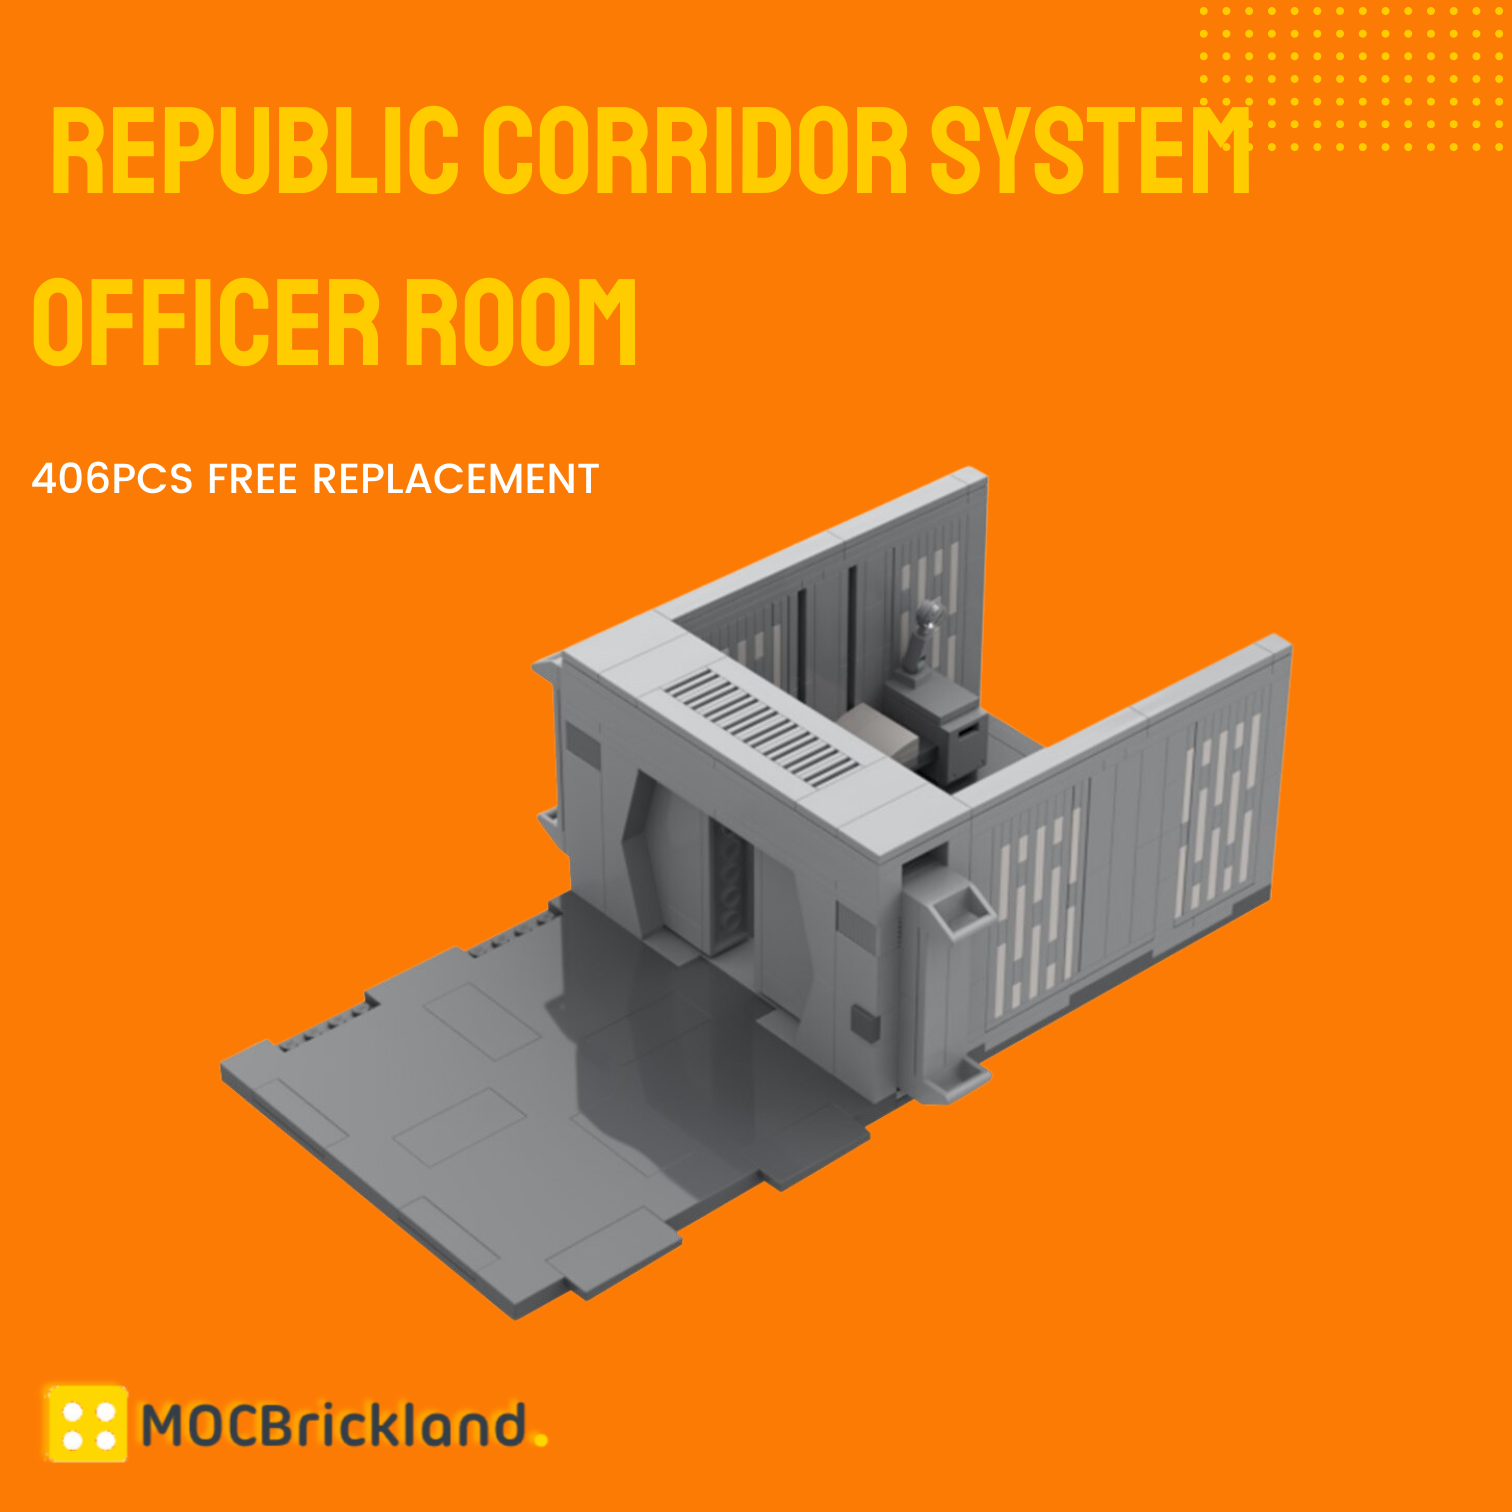 Republic Corridor System Officer Room MOC-96793 Star Wars With 406pcs 